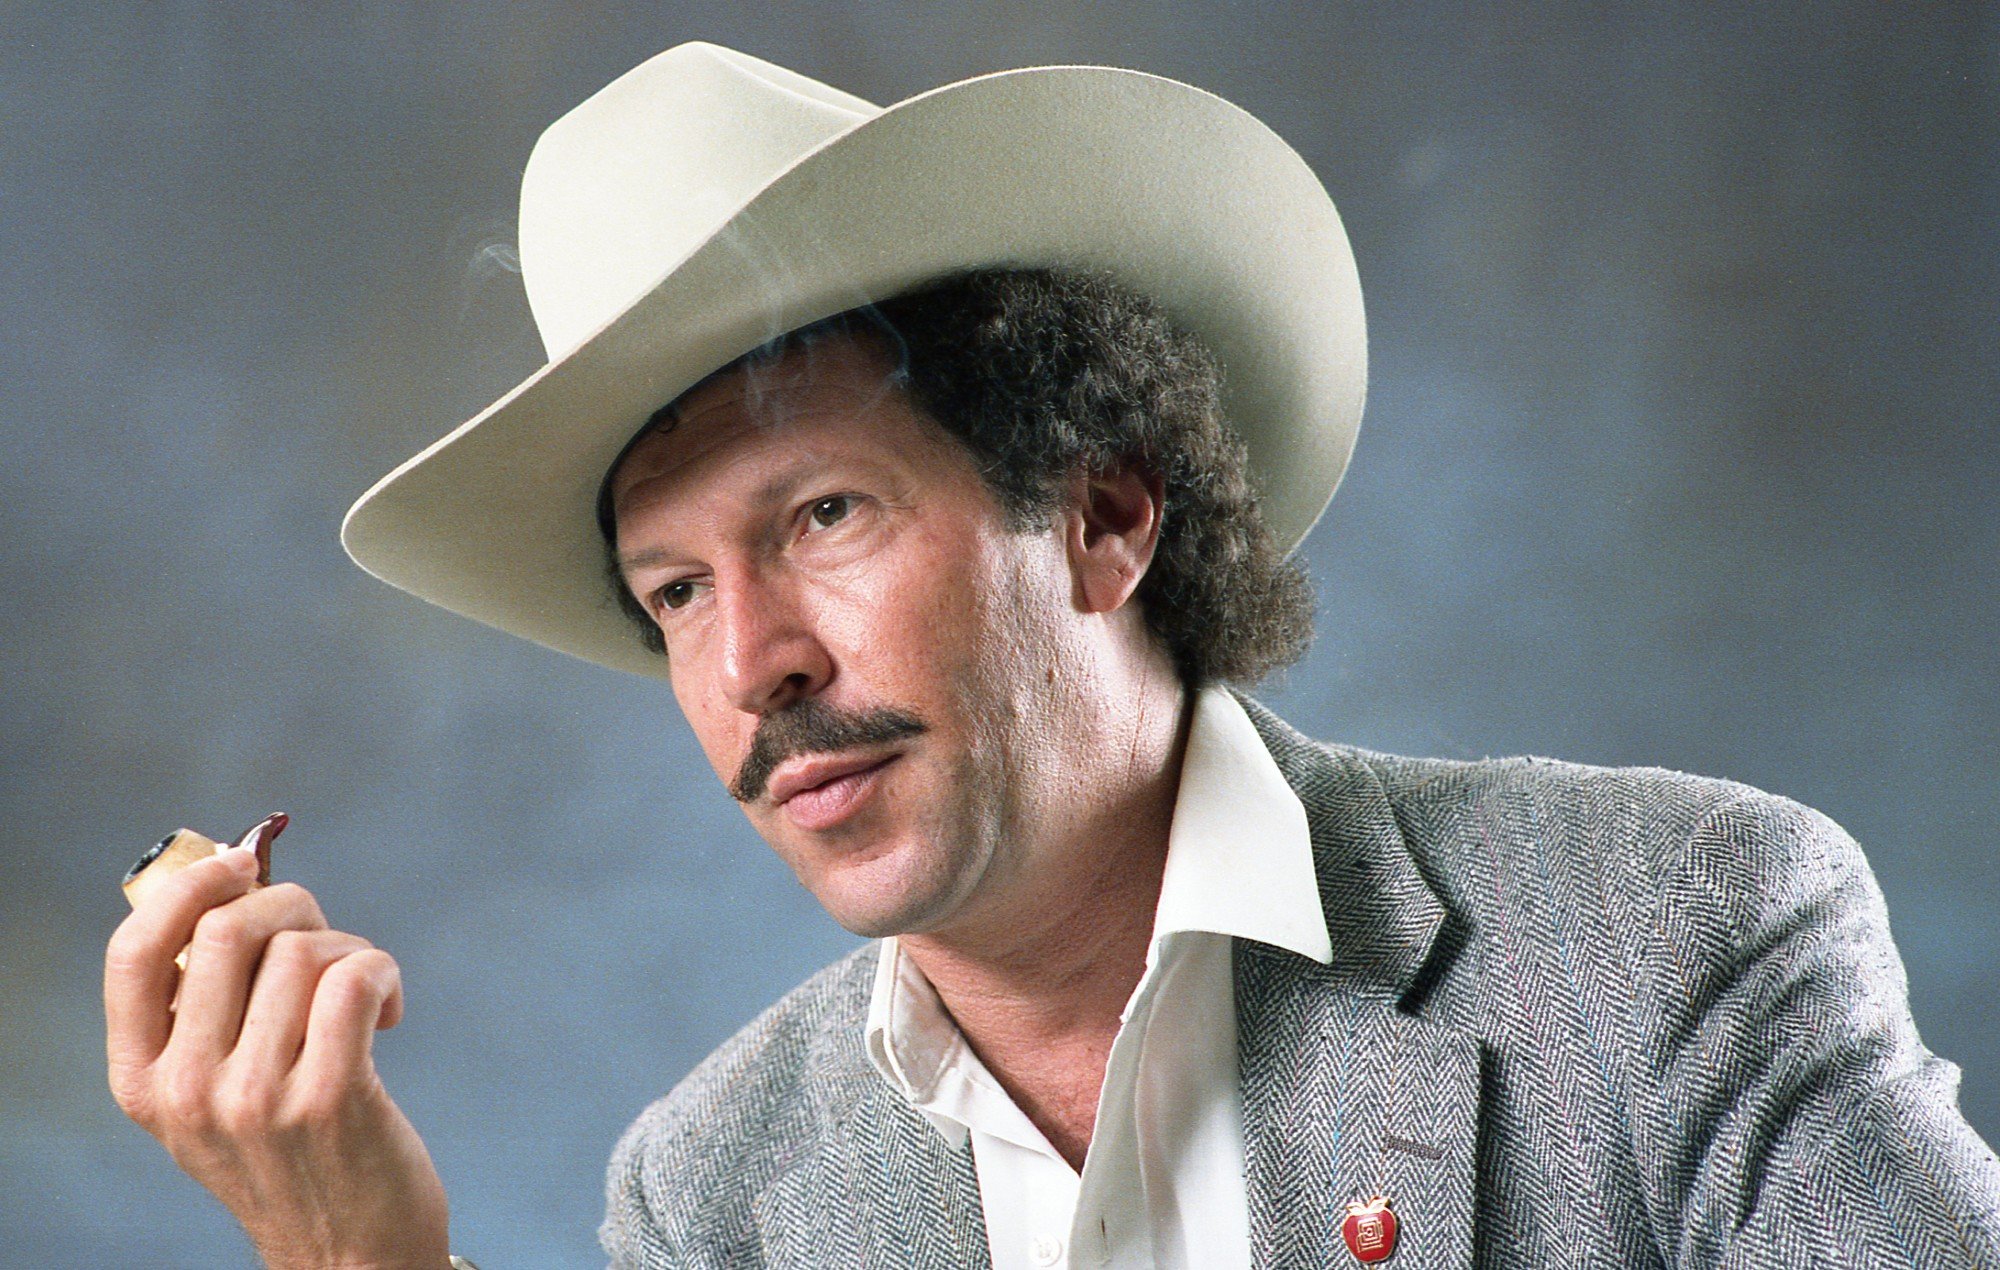 Country music veteran and mystery writer Kinky Friedman has died, aged 79